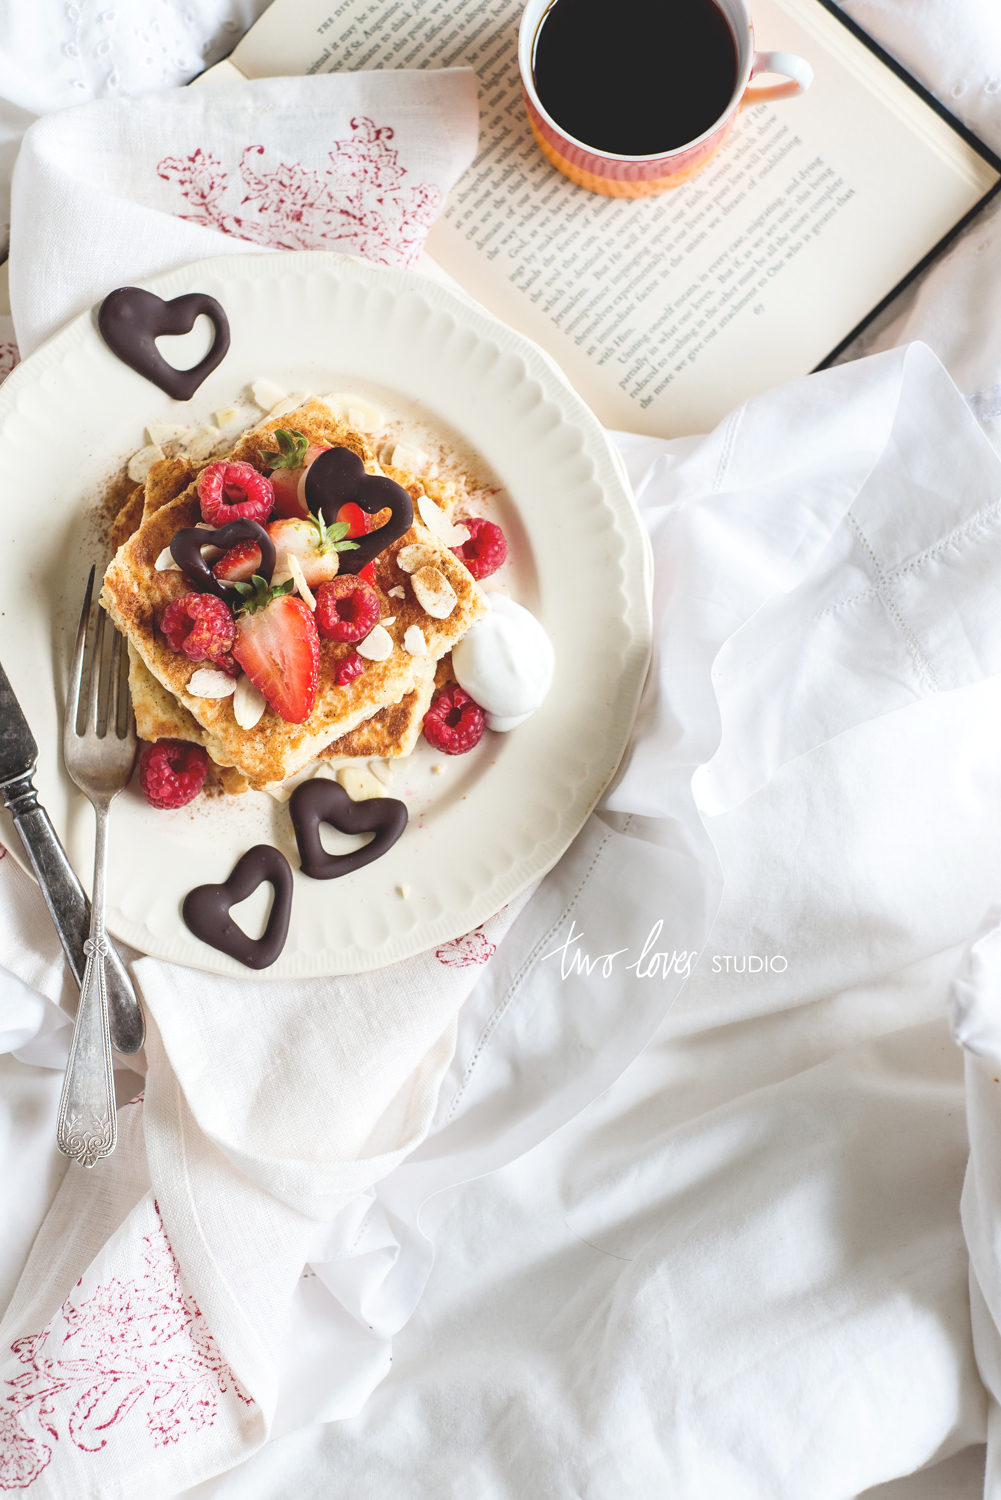 two-loves-studio-coconut-french-toast-with-dark-chocolate-hearts4w